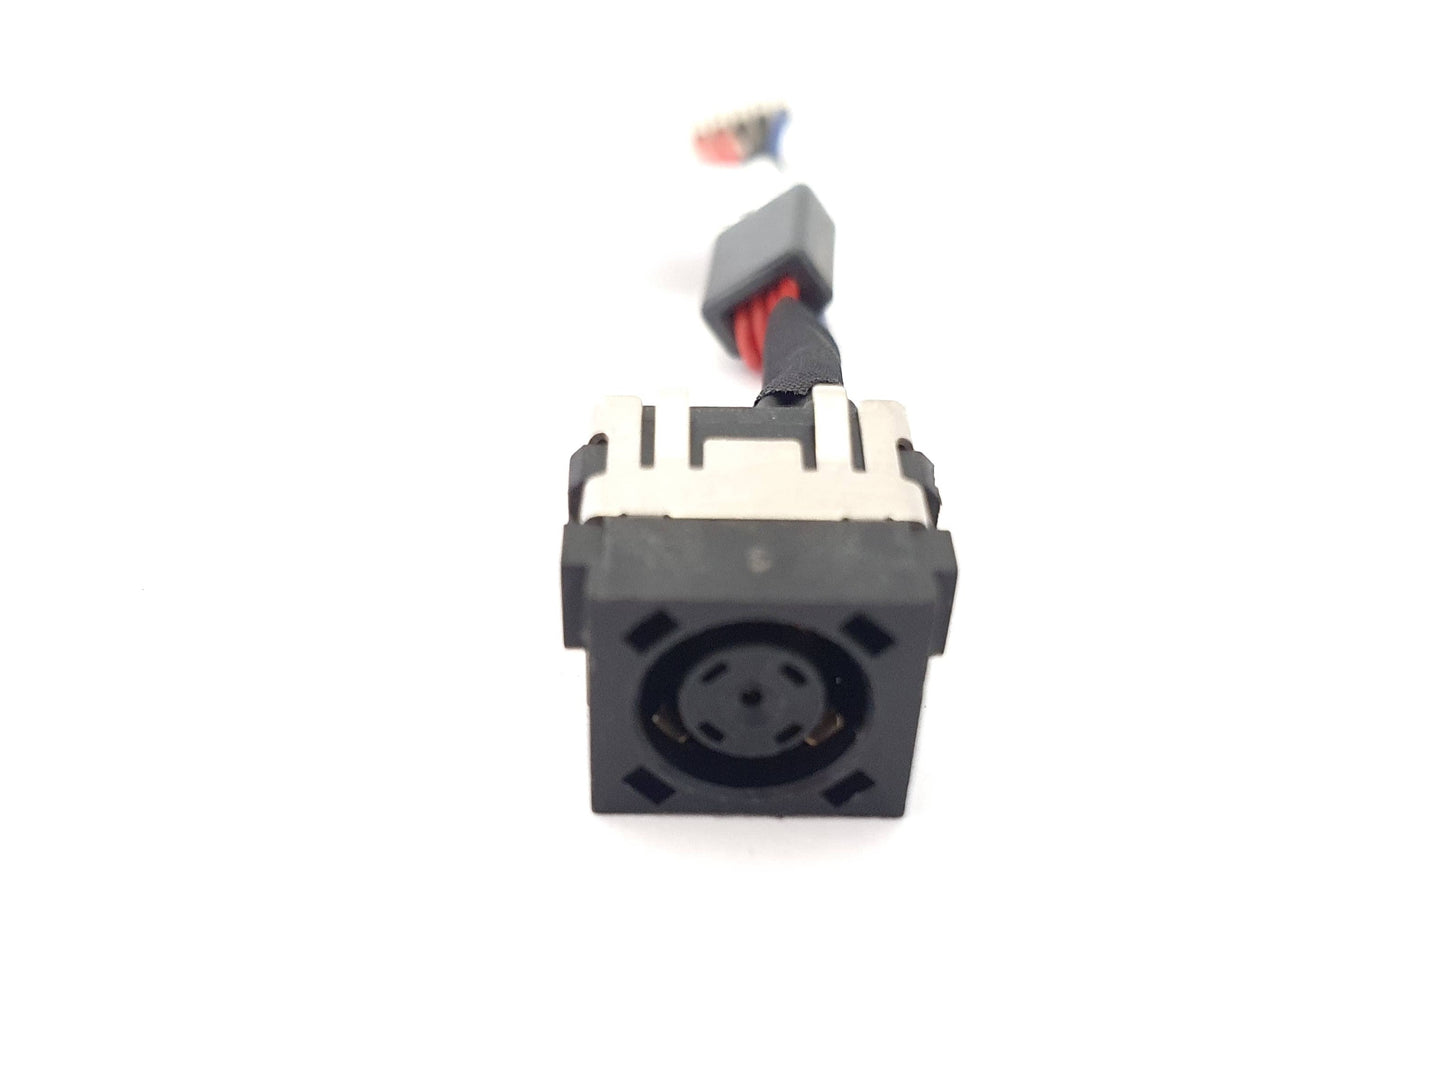 New Genuine Dell replacement DC Power Port Jack Socket for Dell Latitude 14 E6440.